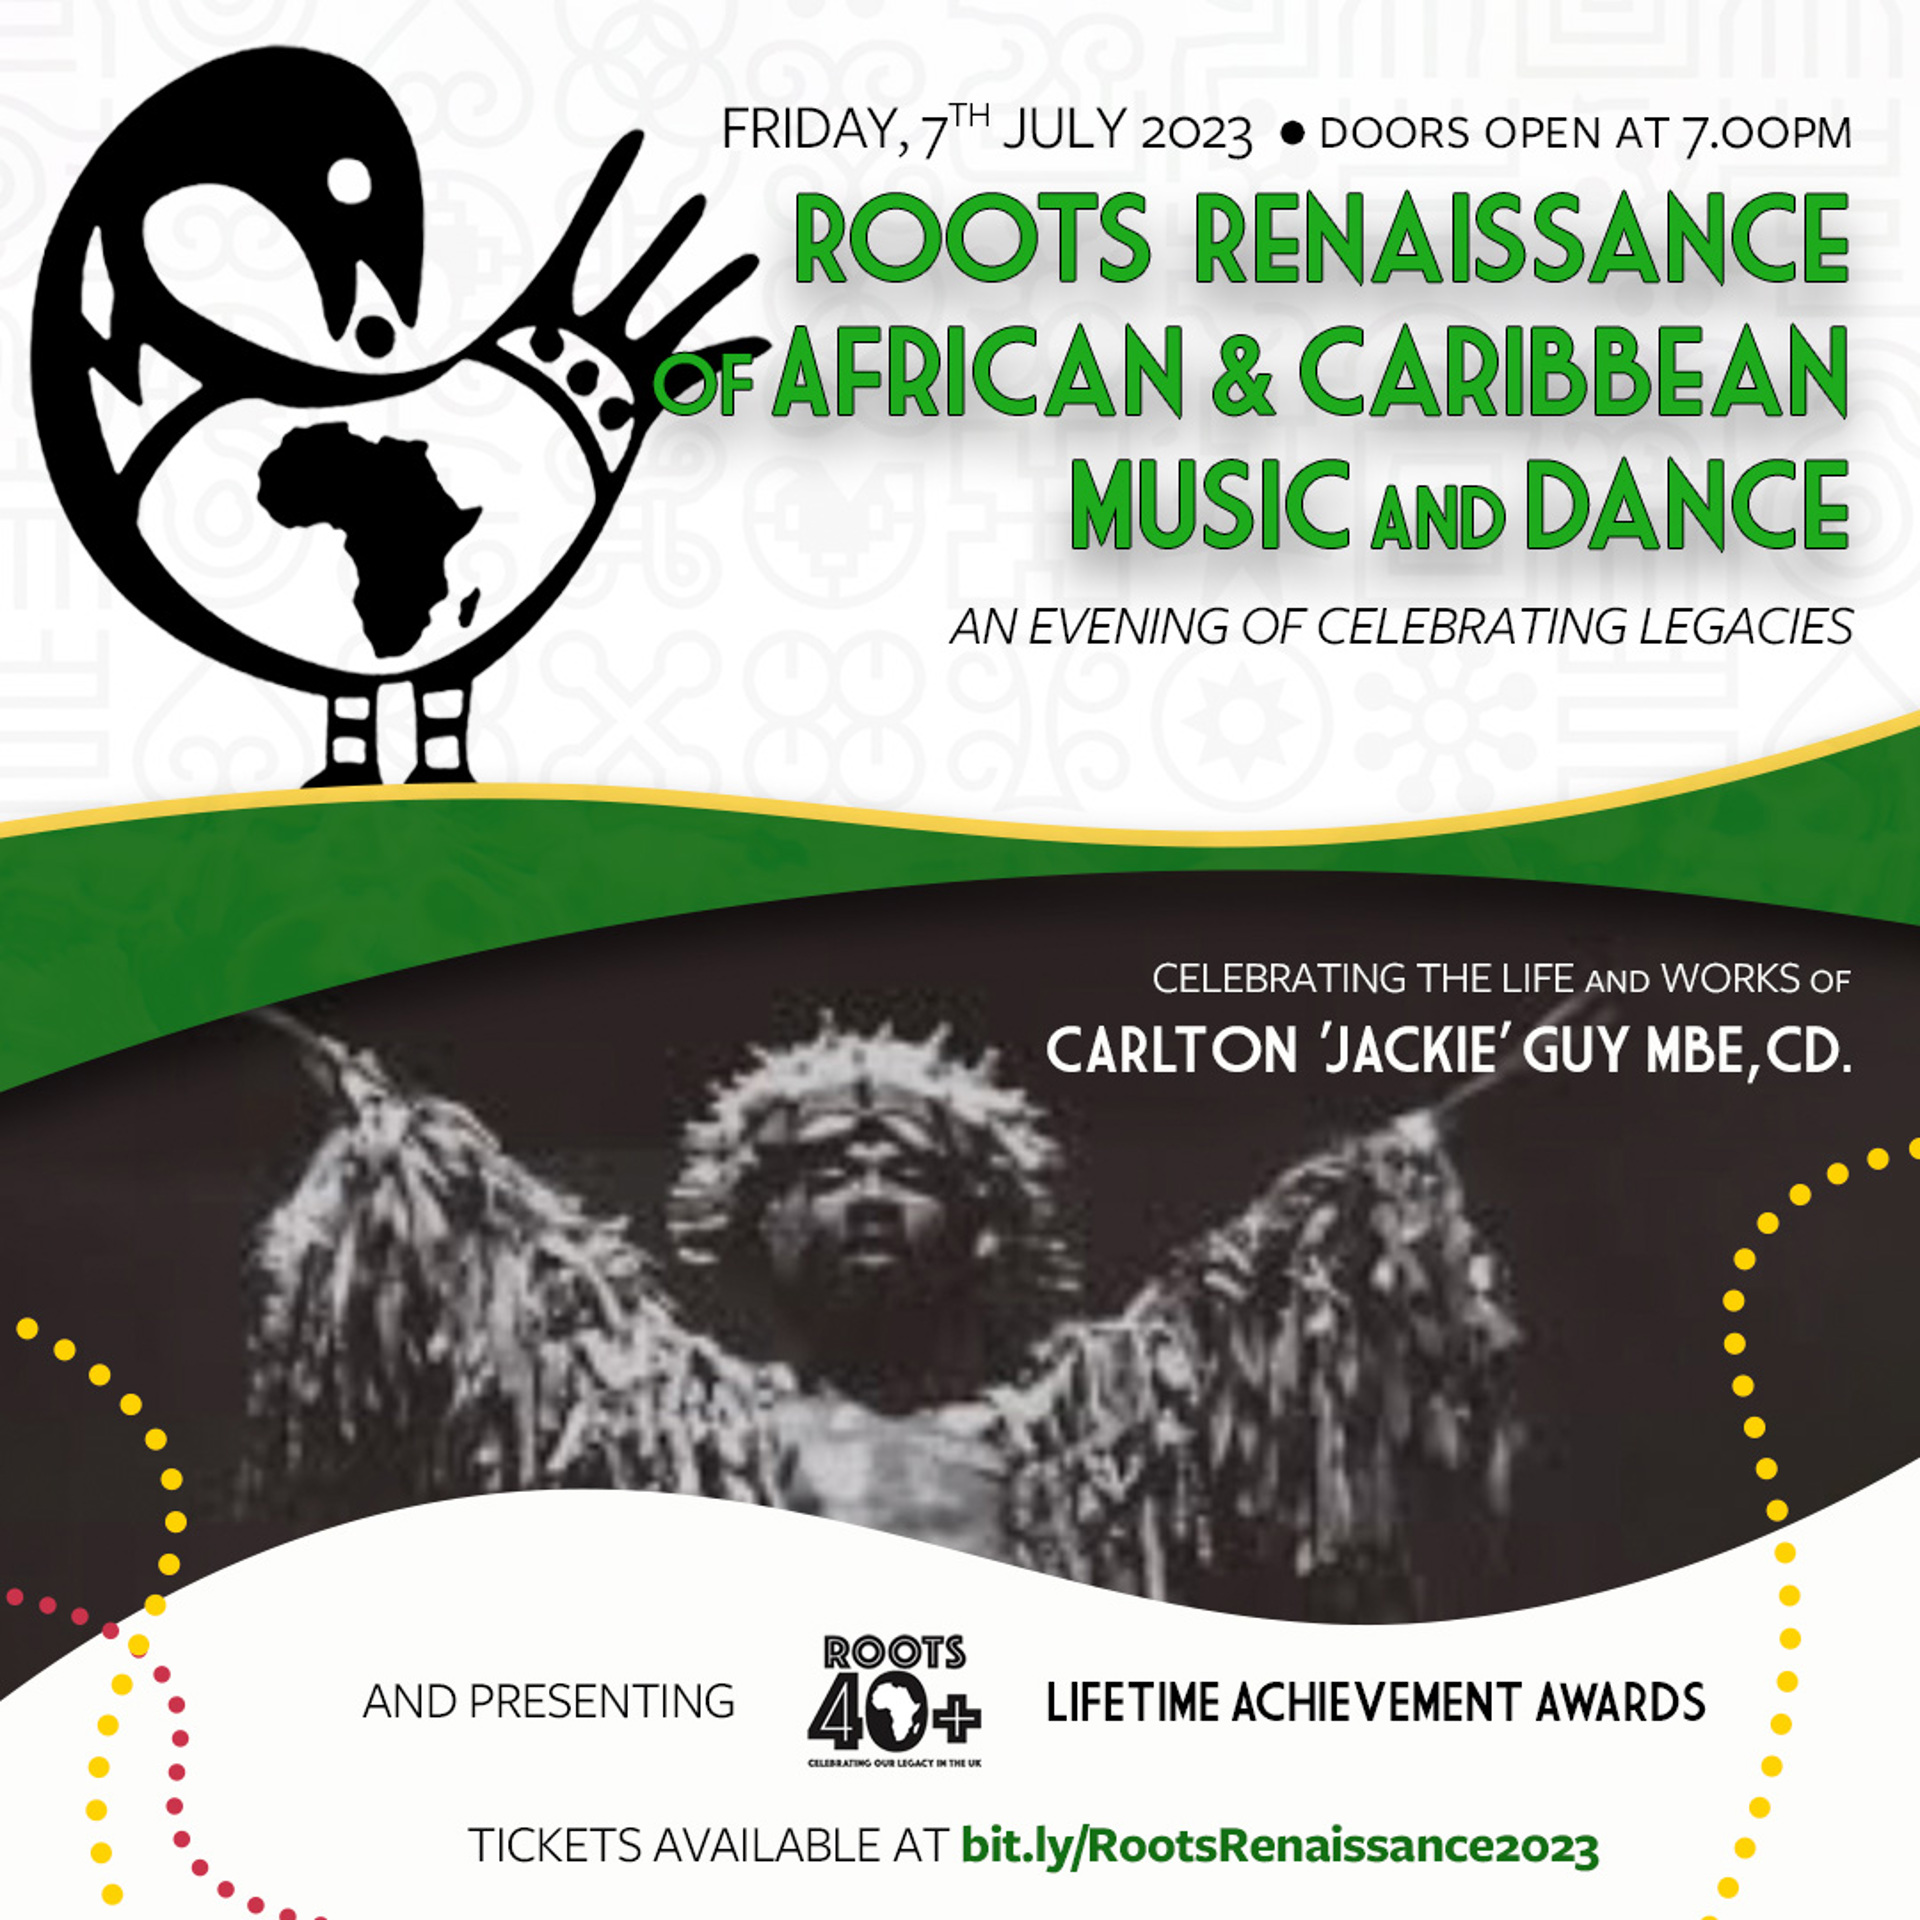 poster for roots renaissance of African and Caribbean music and dance